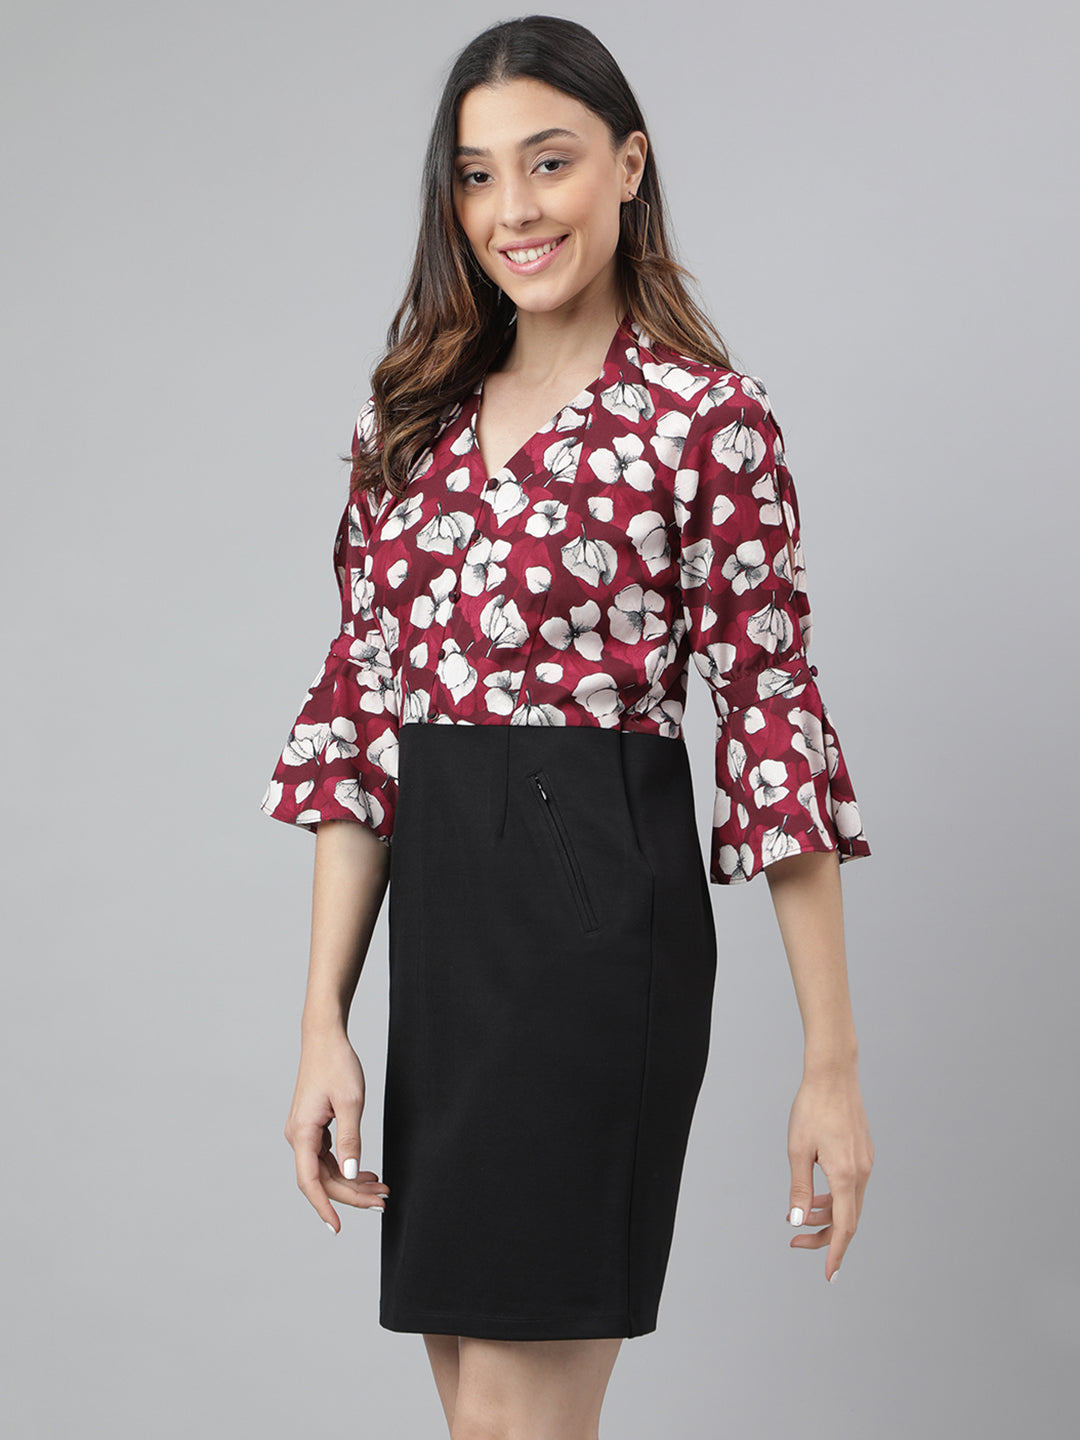 Maroon 3/4 Sleeve V-Neck Floral Print 2 Fir 1 Women Dress for Casual